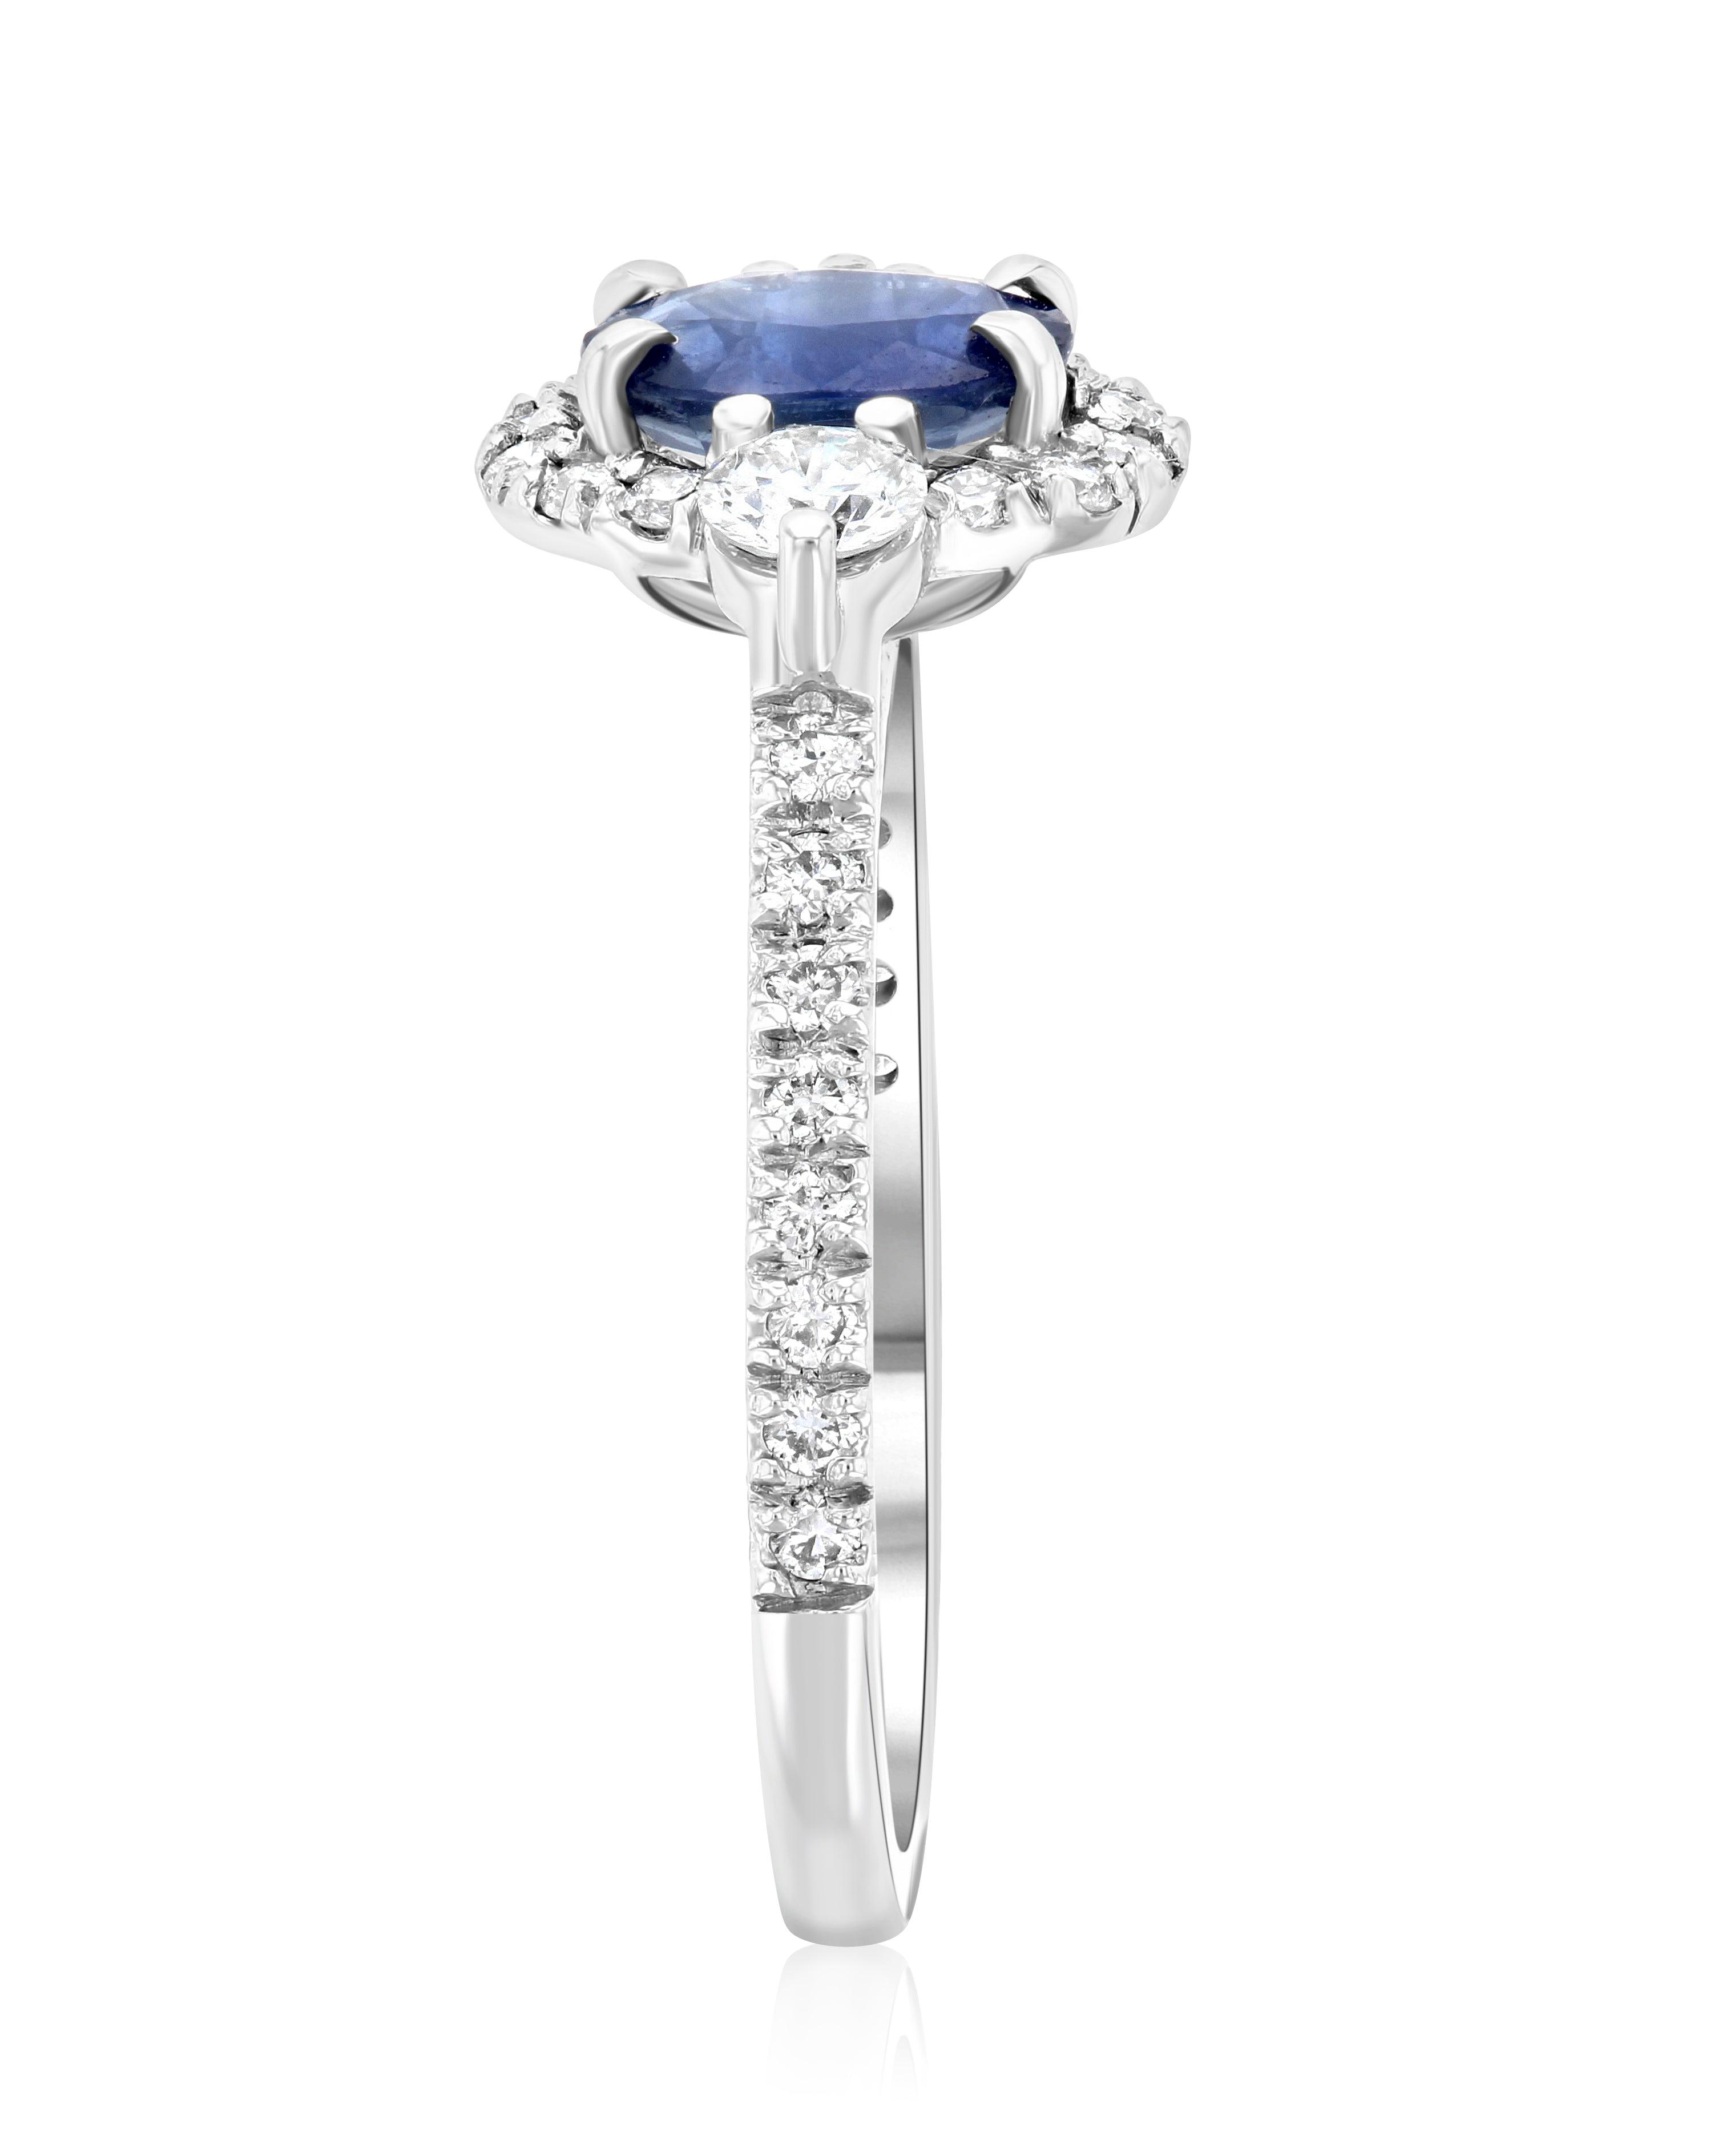 Sapphire Oval Diamond Halo Engagement Ring (1.60 ct. tw.) - The Brothers Jewelry Co.